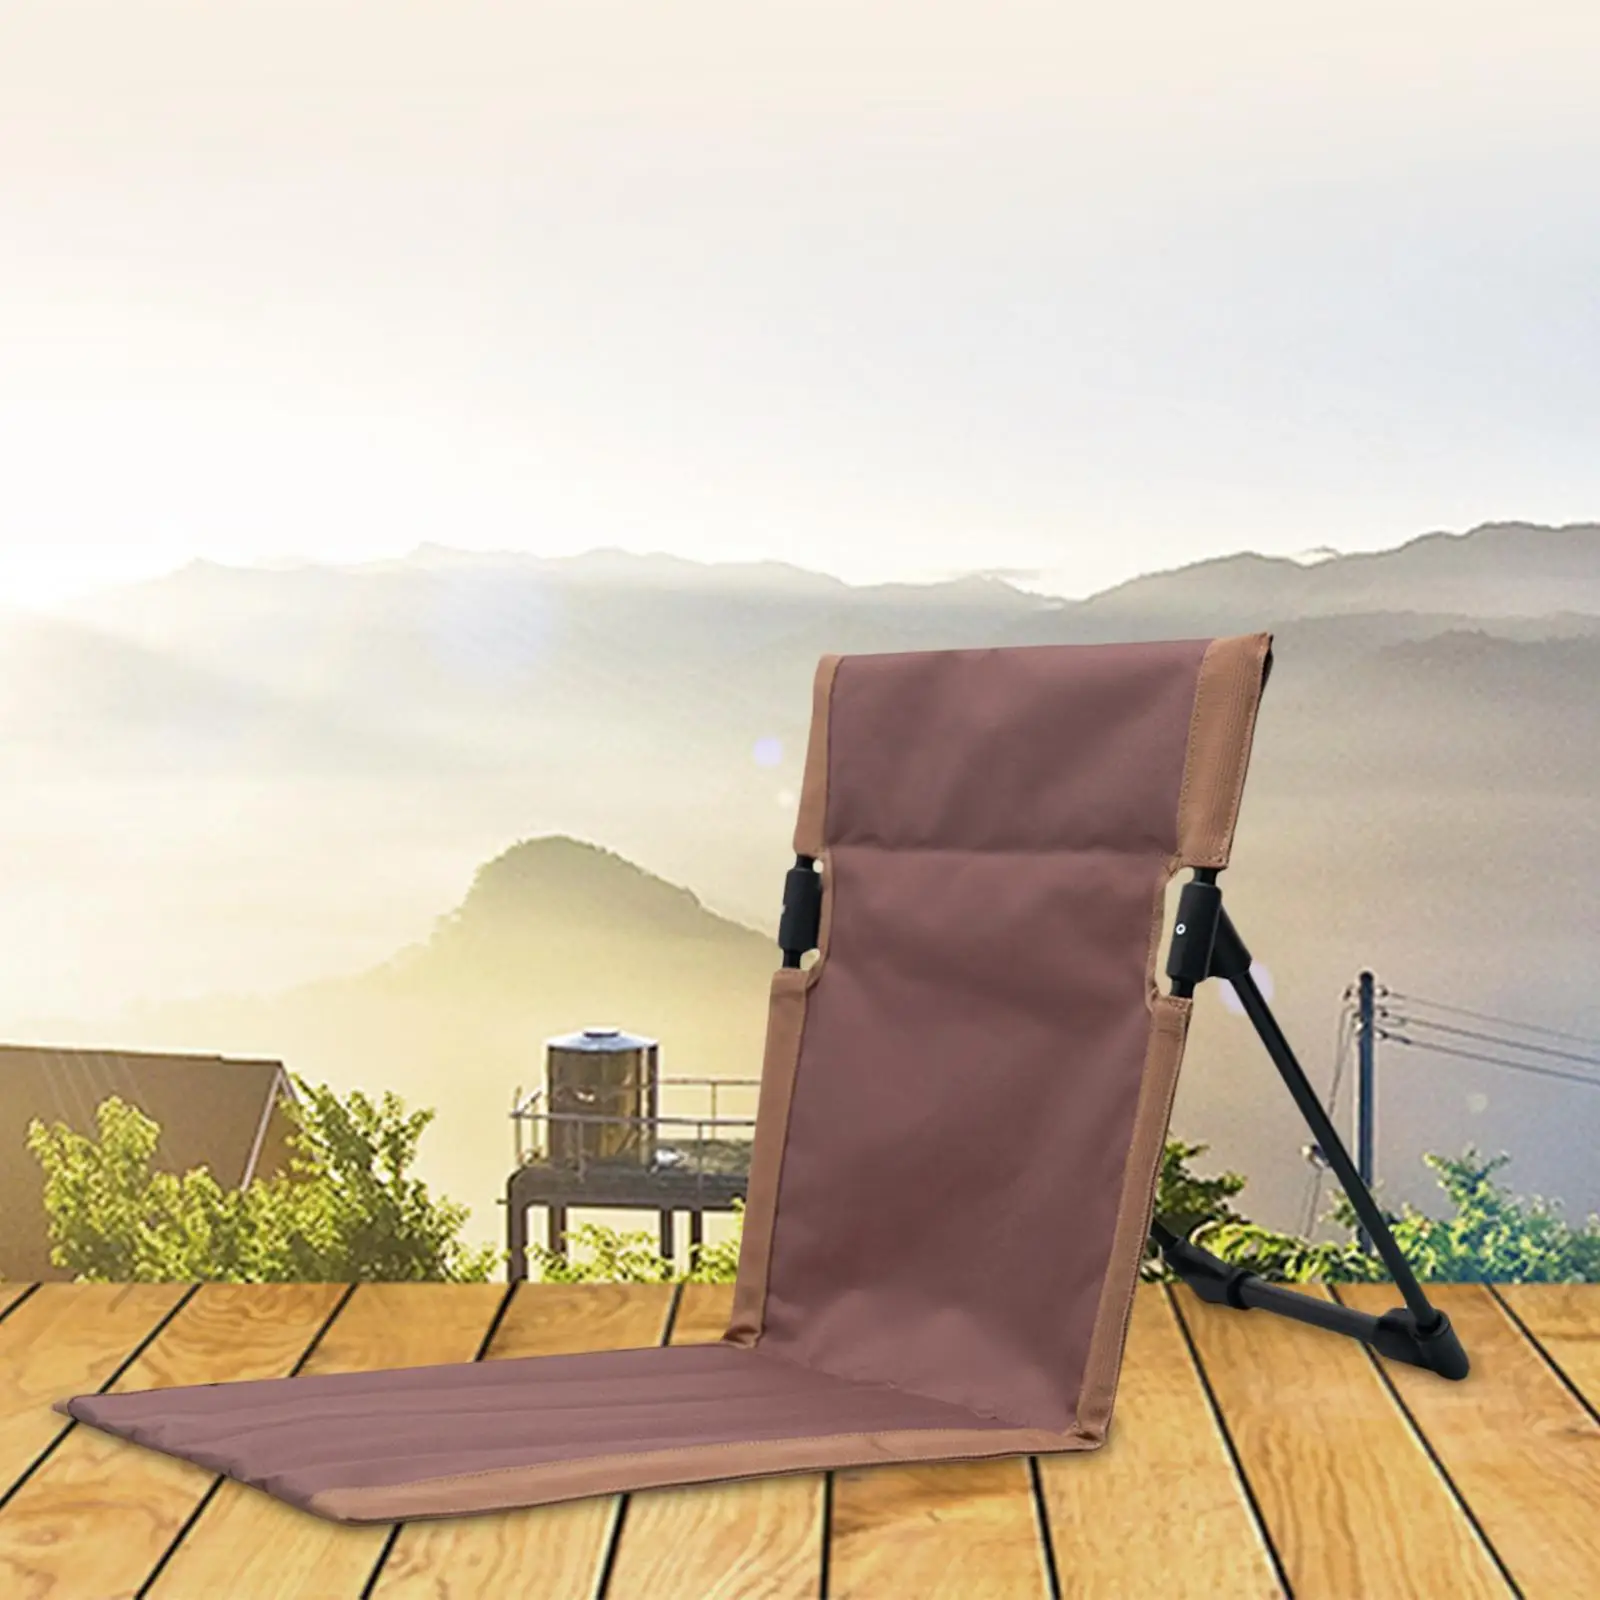 Backrest Pad Camping Mat Seat Cushion Camping Accessory for music Concerts